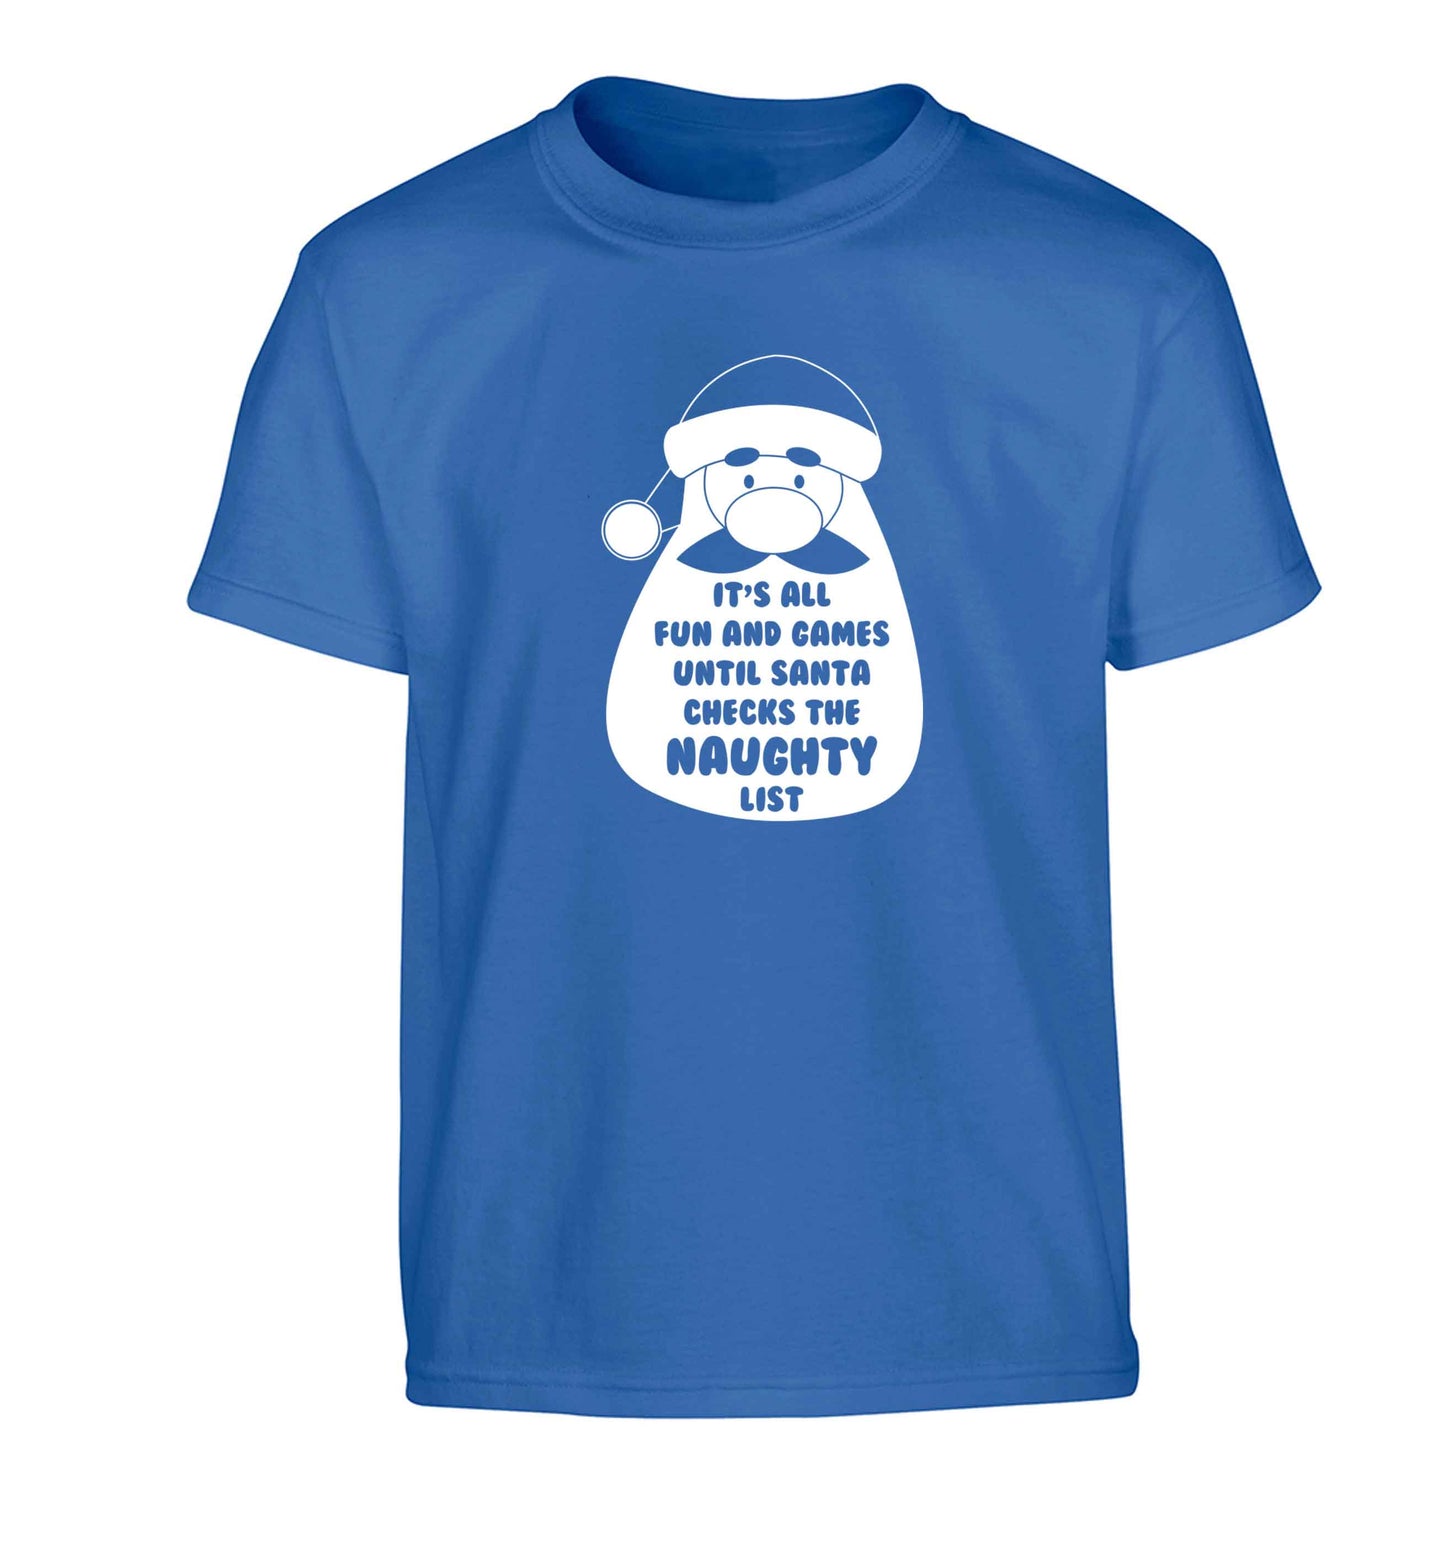 It's all fun and games until Santa checks the naughty list Children's blue Tshirt 12-13 Years